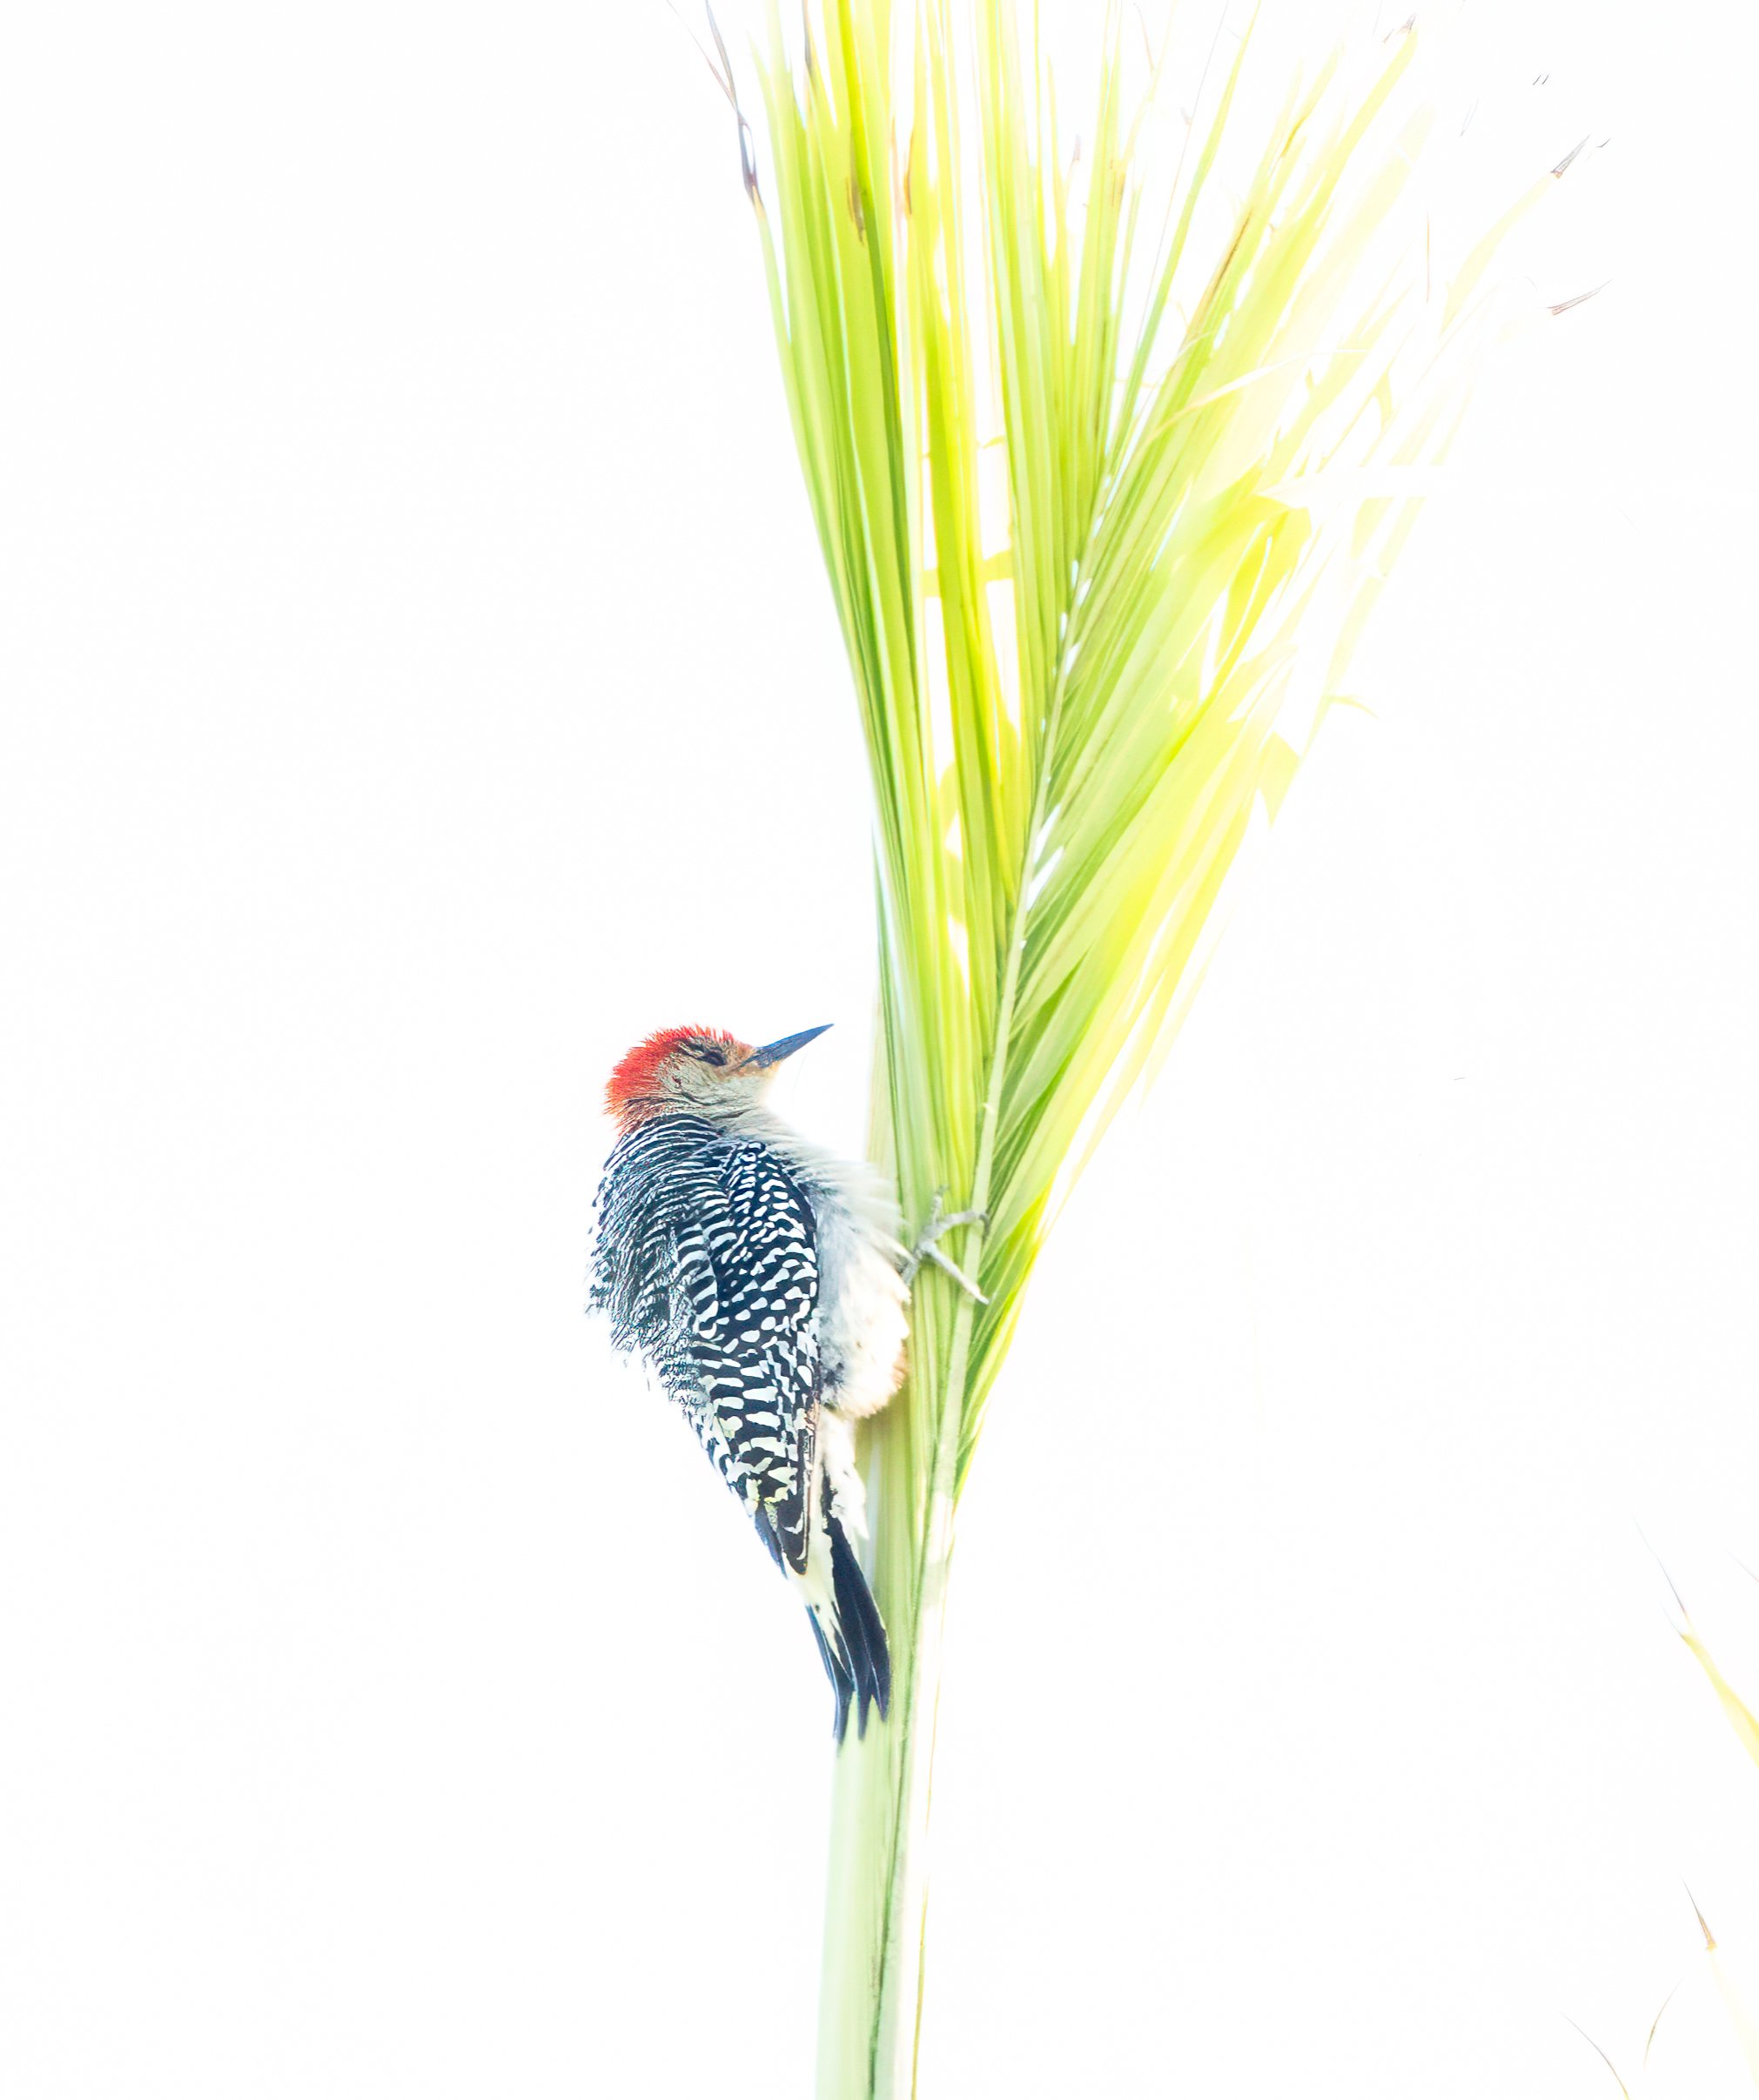 Red-bellied Woodpecker by Jackie Hassine